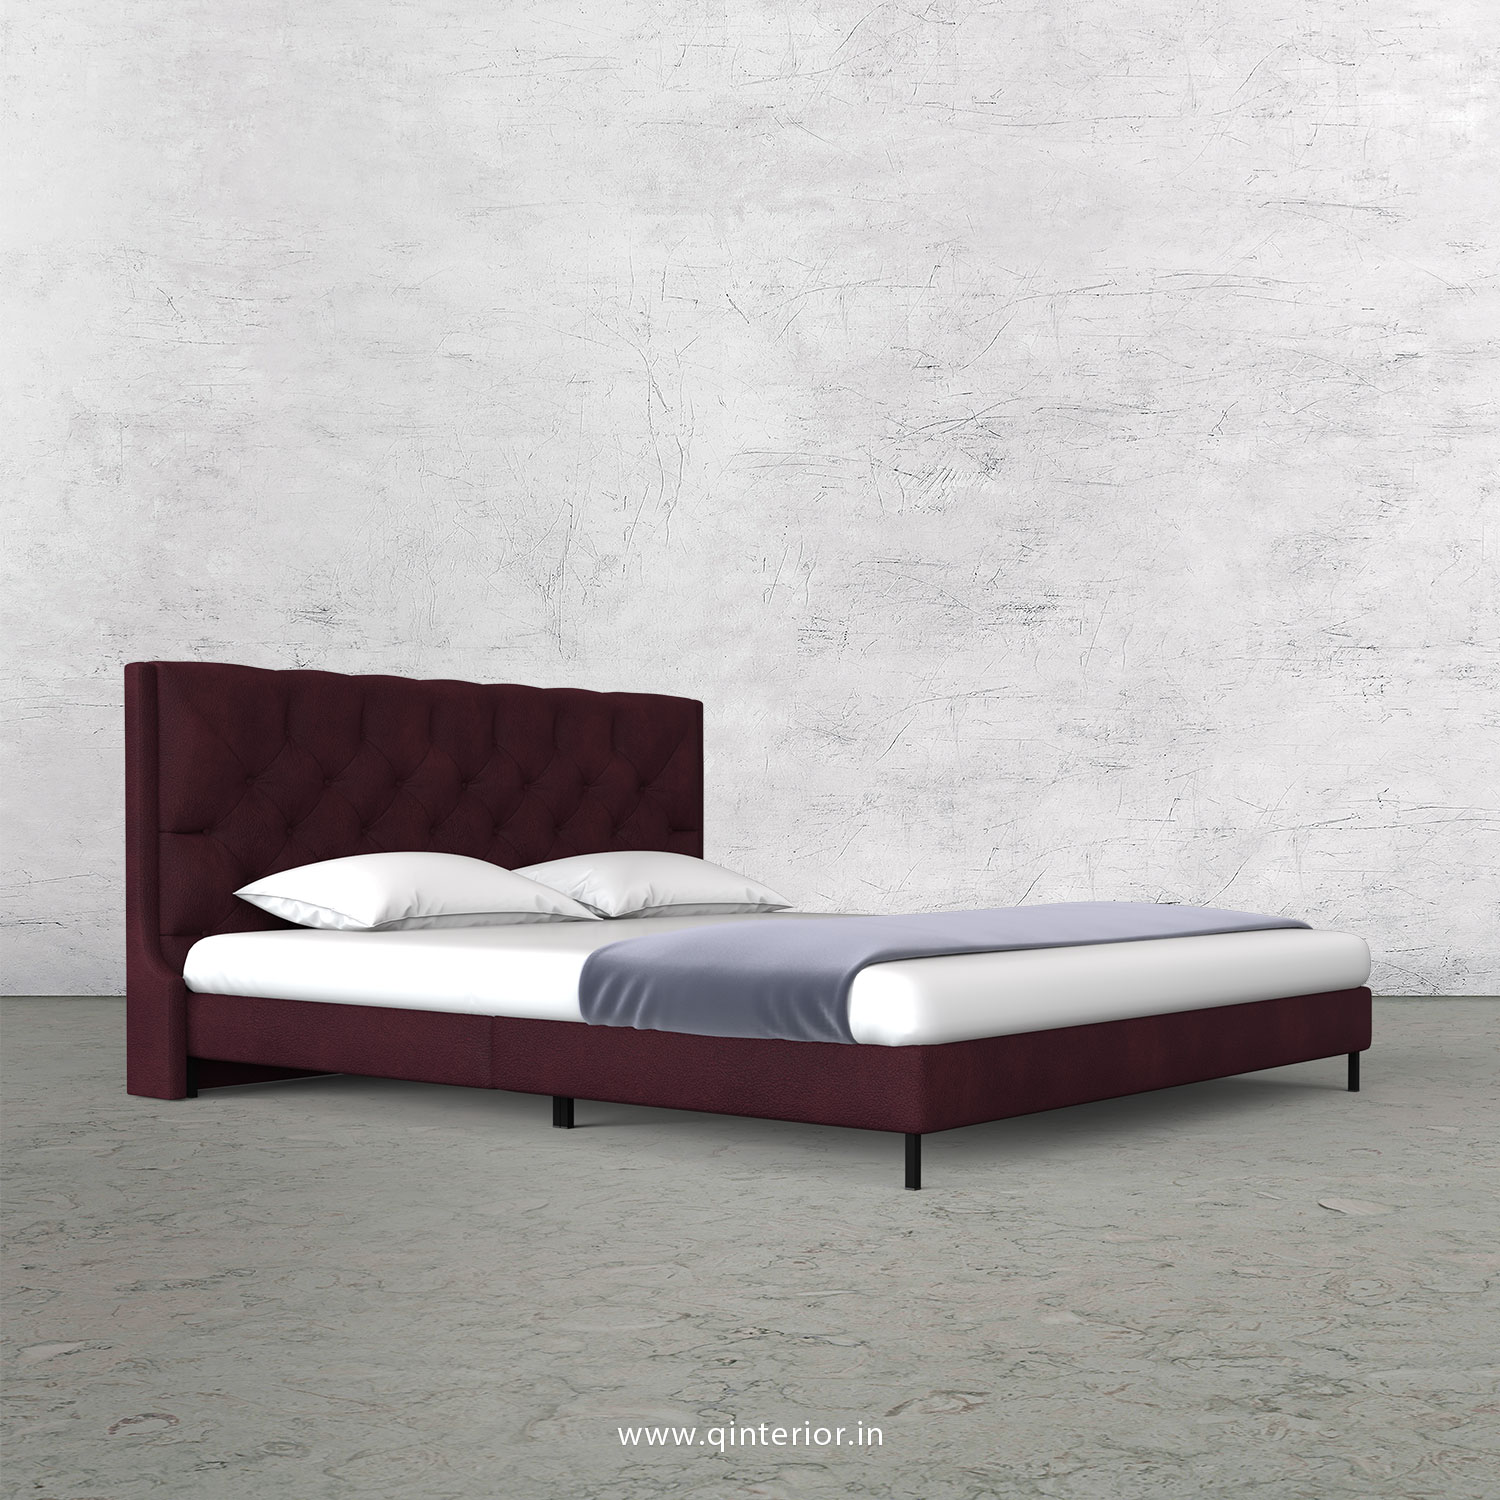 Scorpius King Size Bed in Fab Leather Fabric - KBD003 FL12